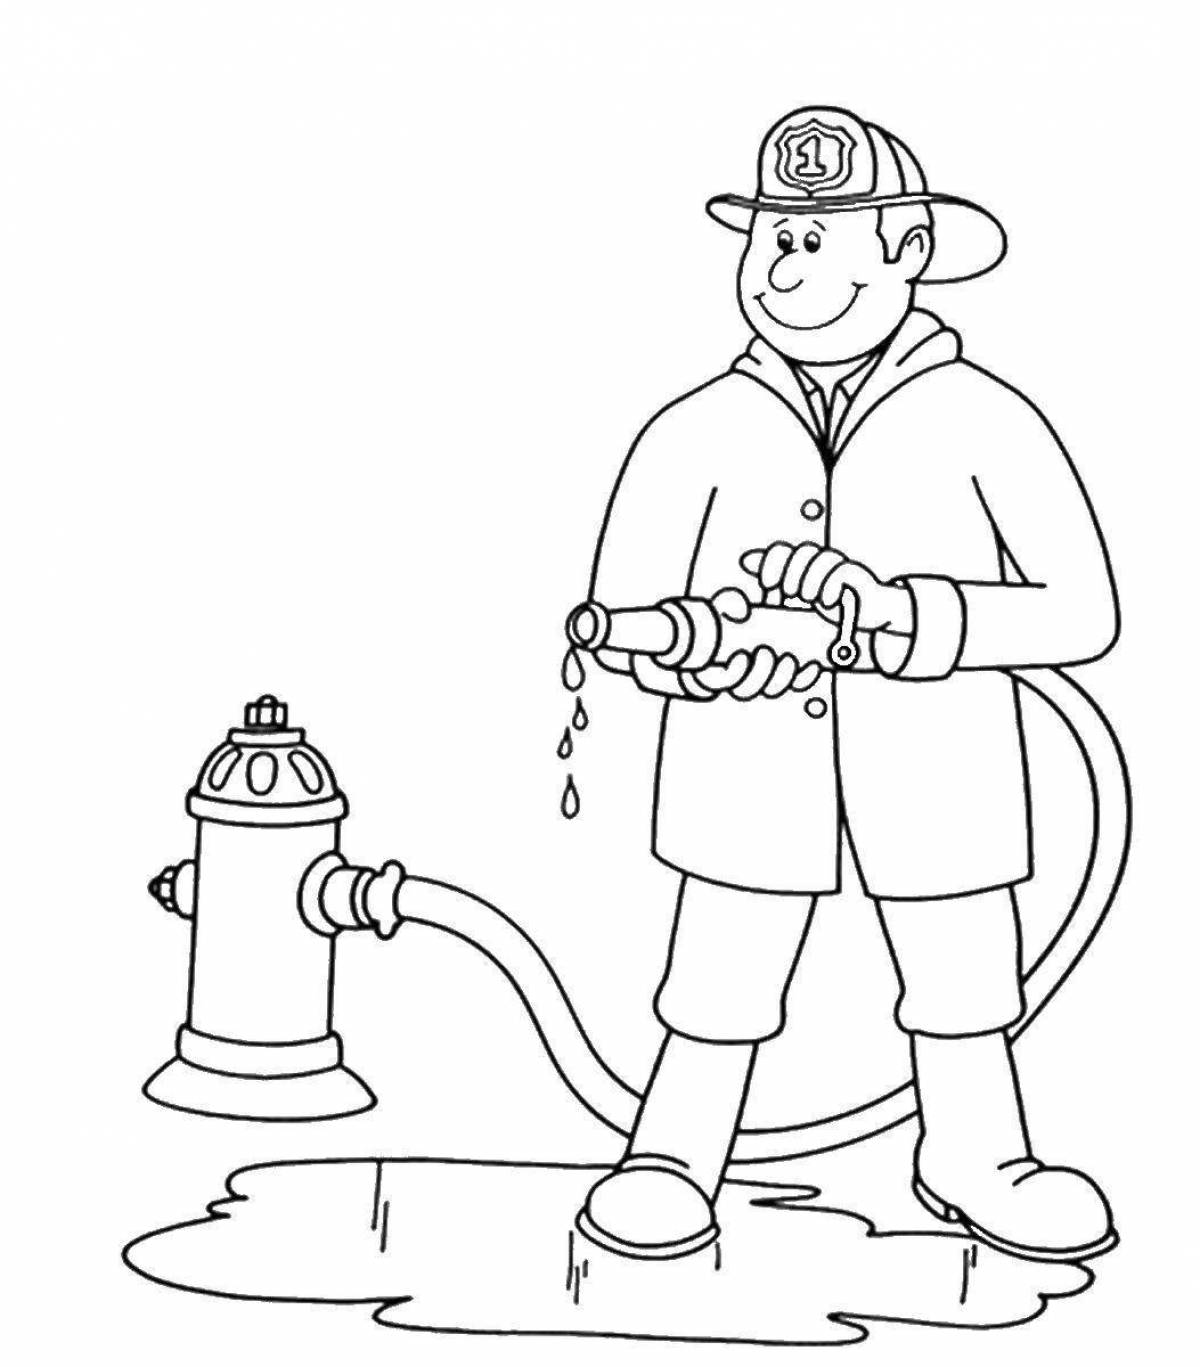 Coloring page dazzling firefighter